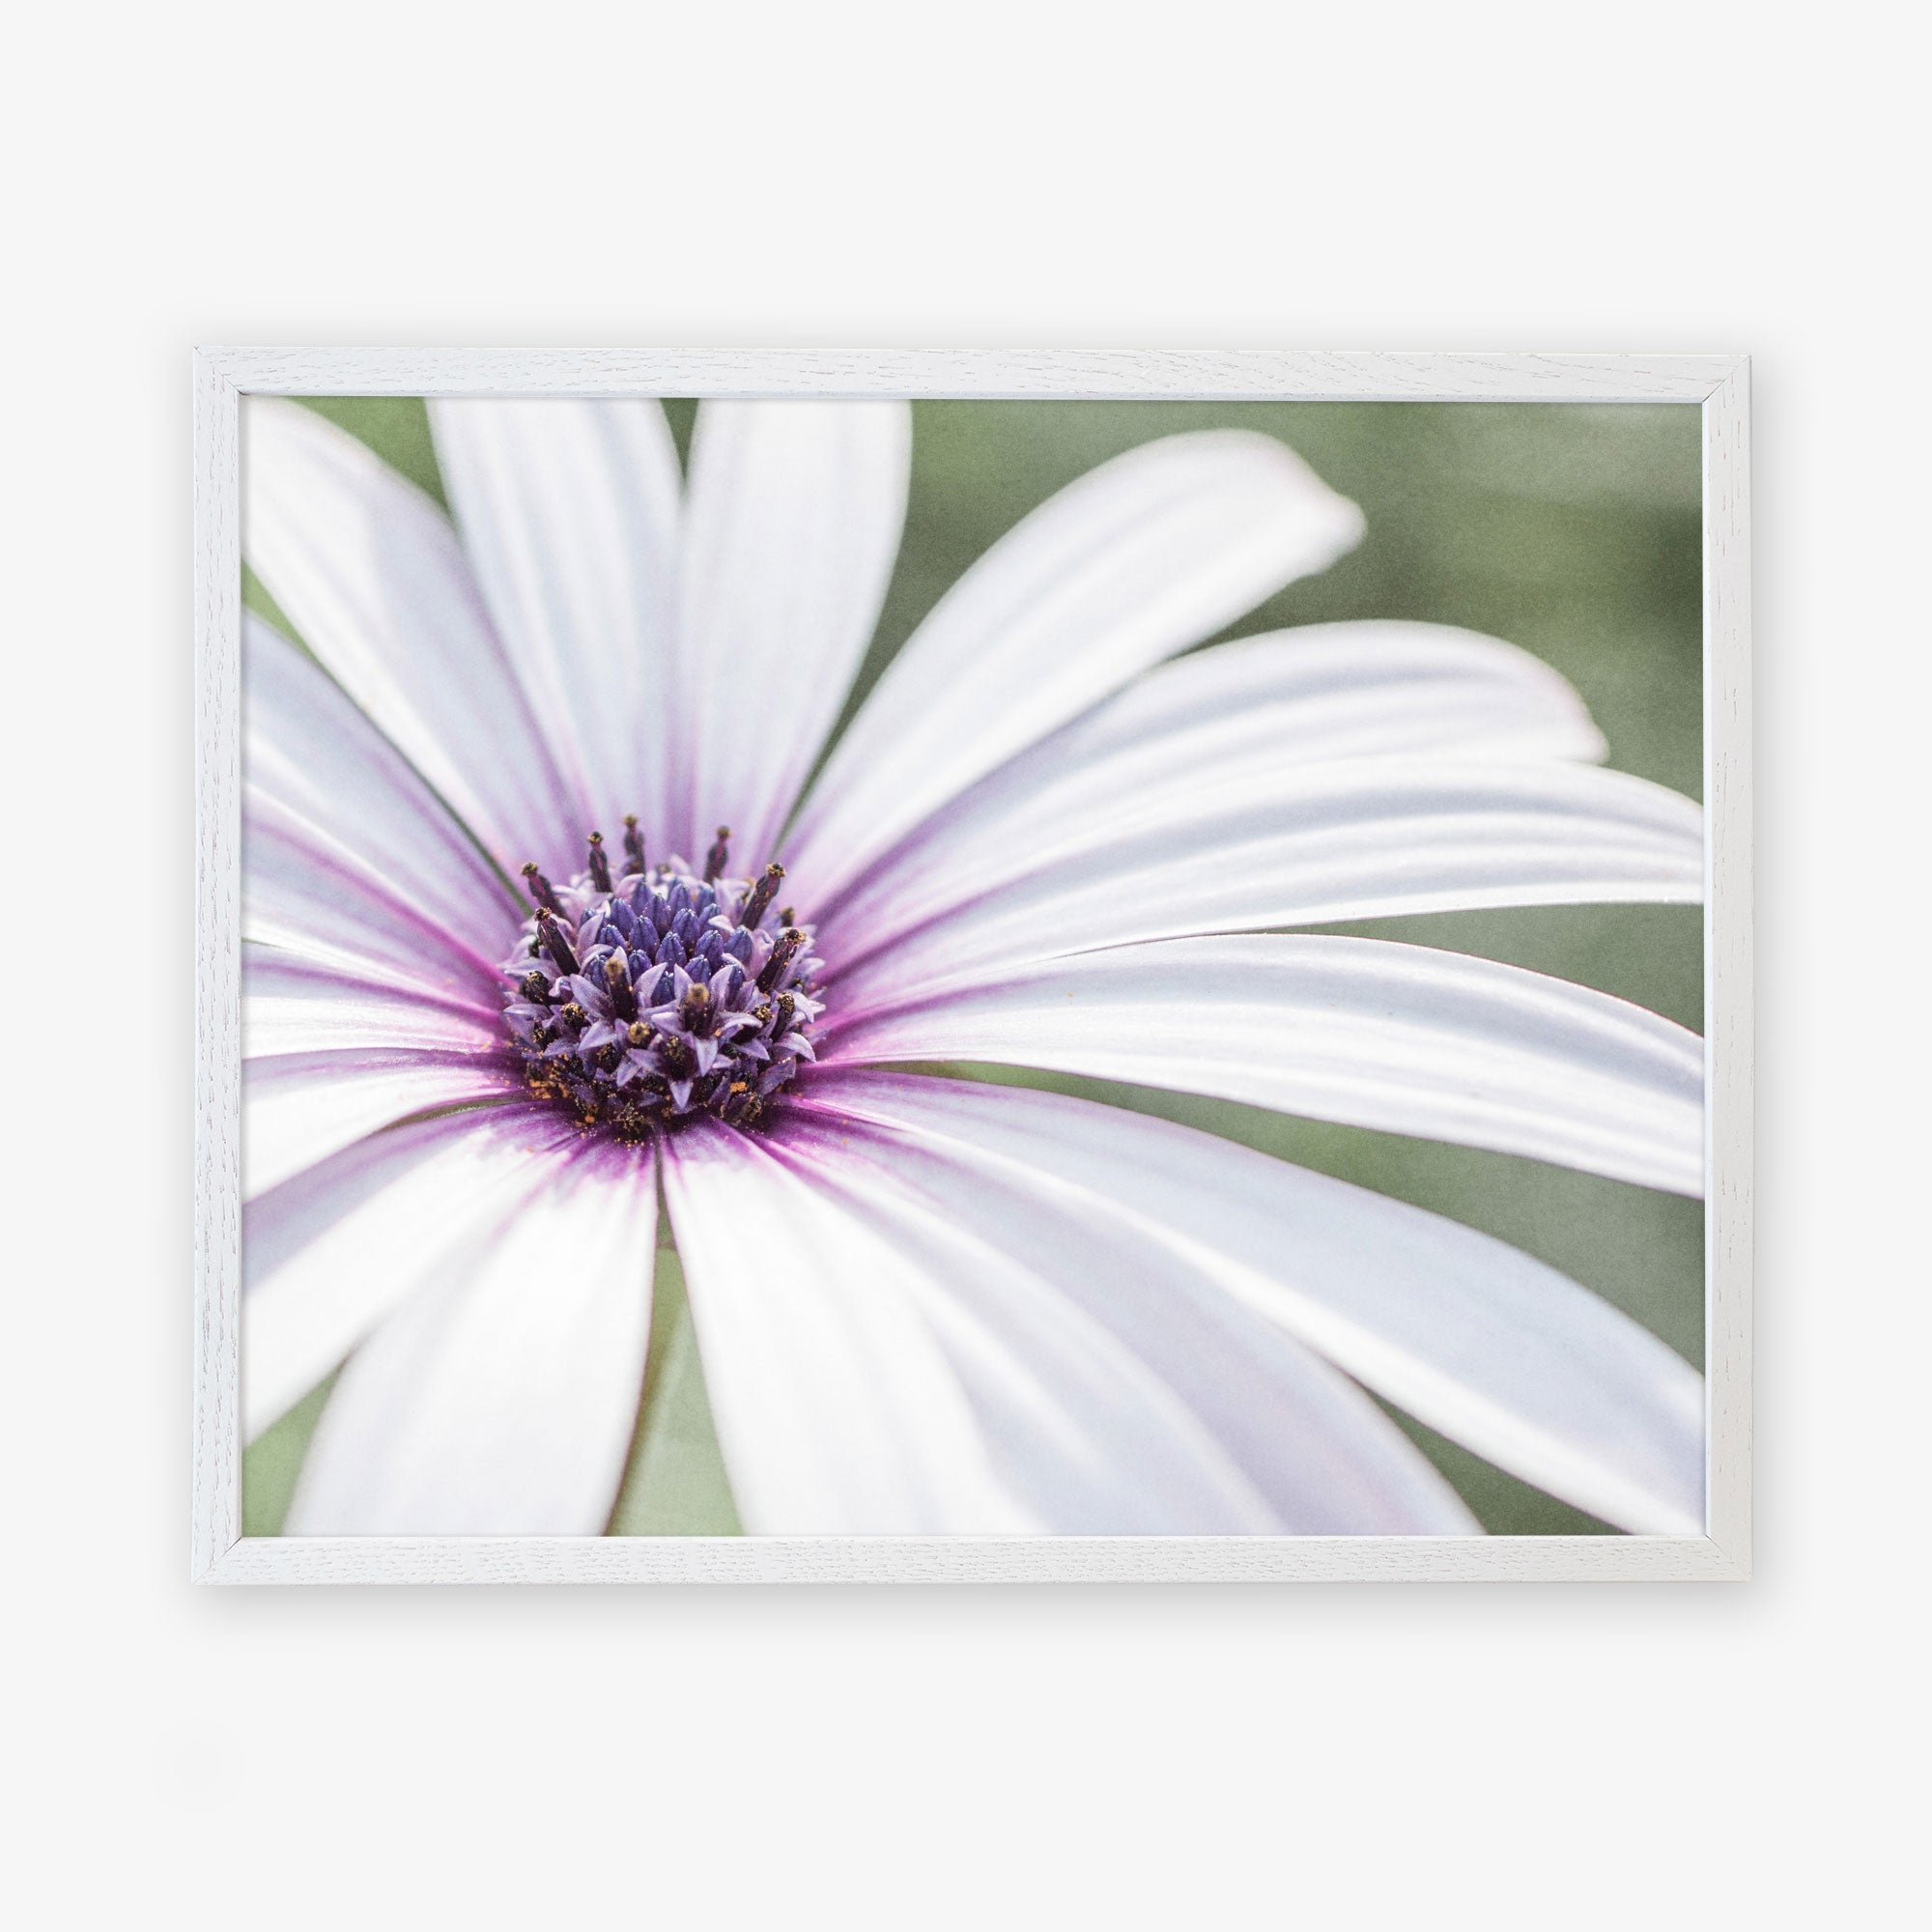 A close-up photo of a Large White Daisy Flower Print, &#39;Bed of Petals&#39; by Offley Green, captured on archival photographic paper, framed against a blurry green background.